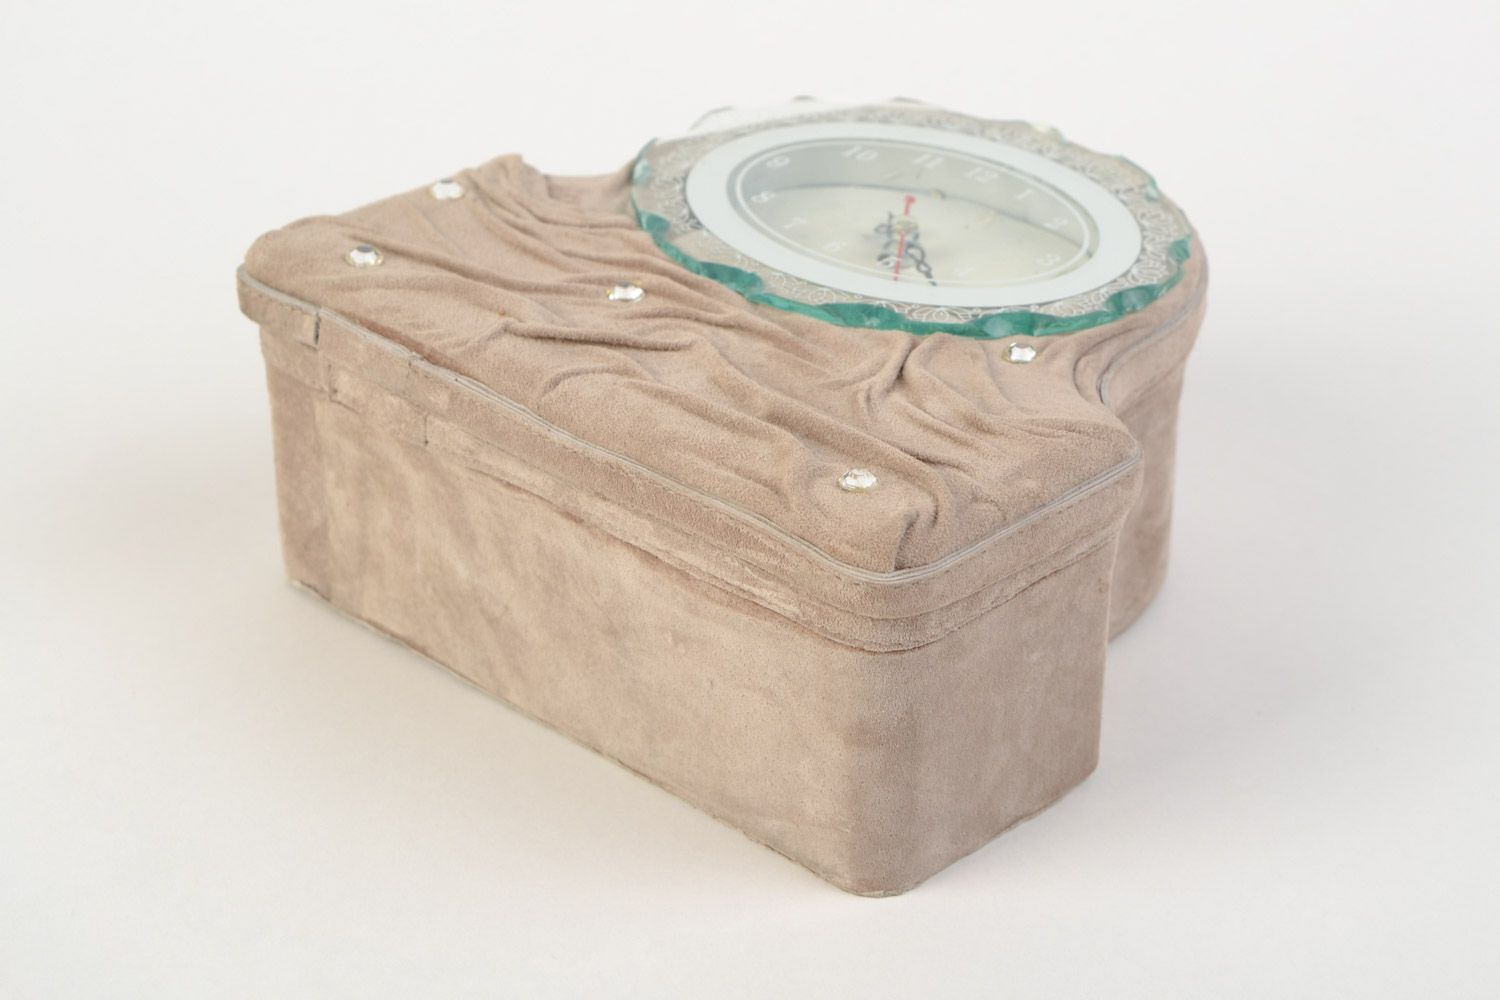 Handmade vintage clock-jewelry box decorated with suede and crystals photo 3